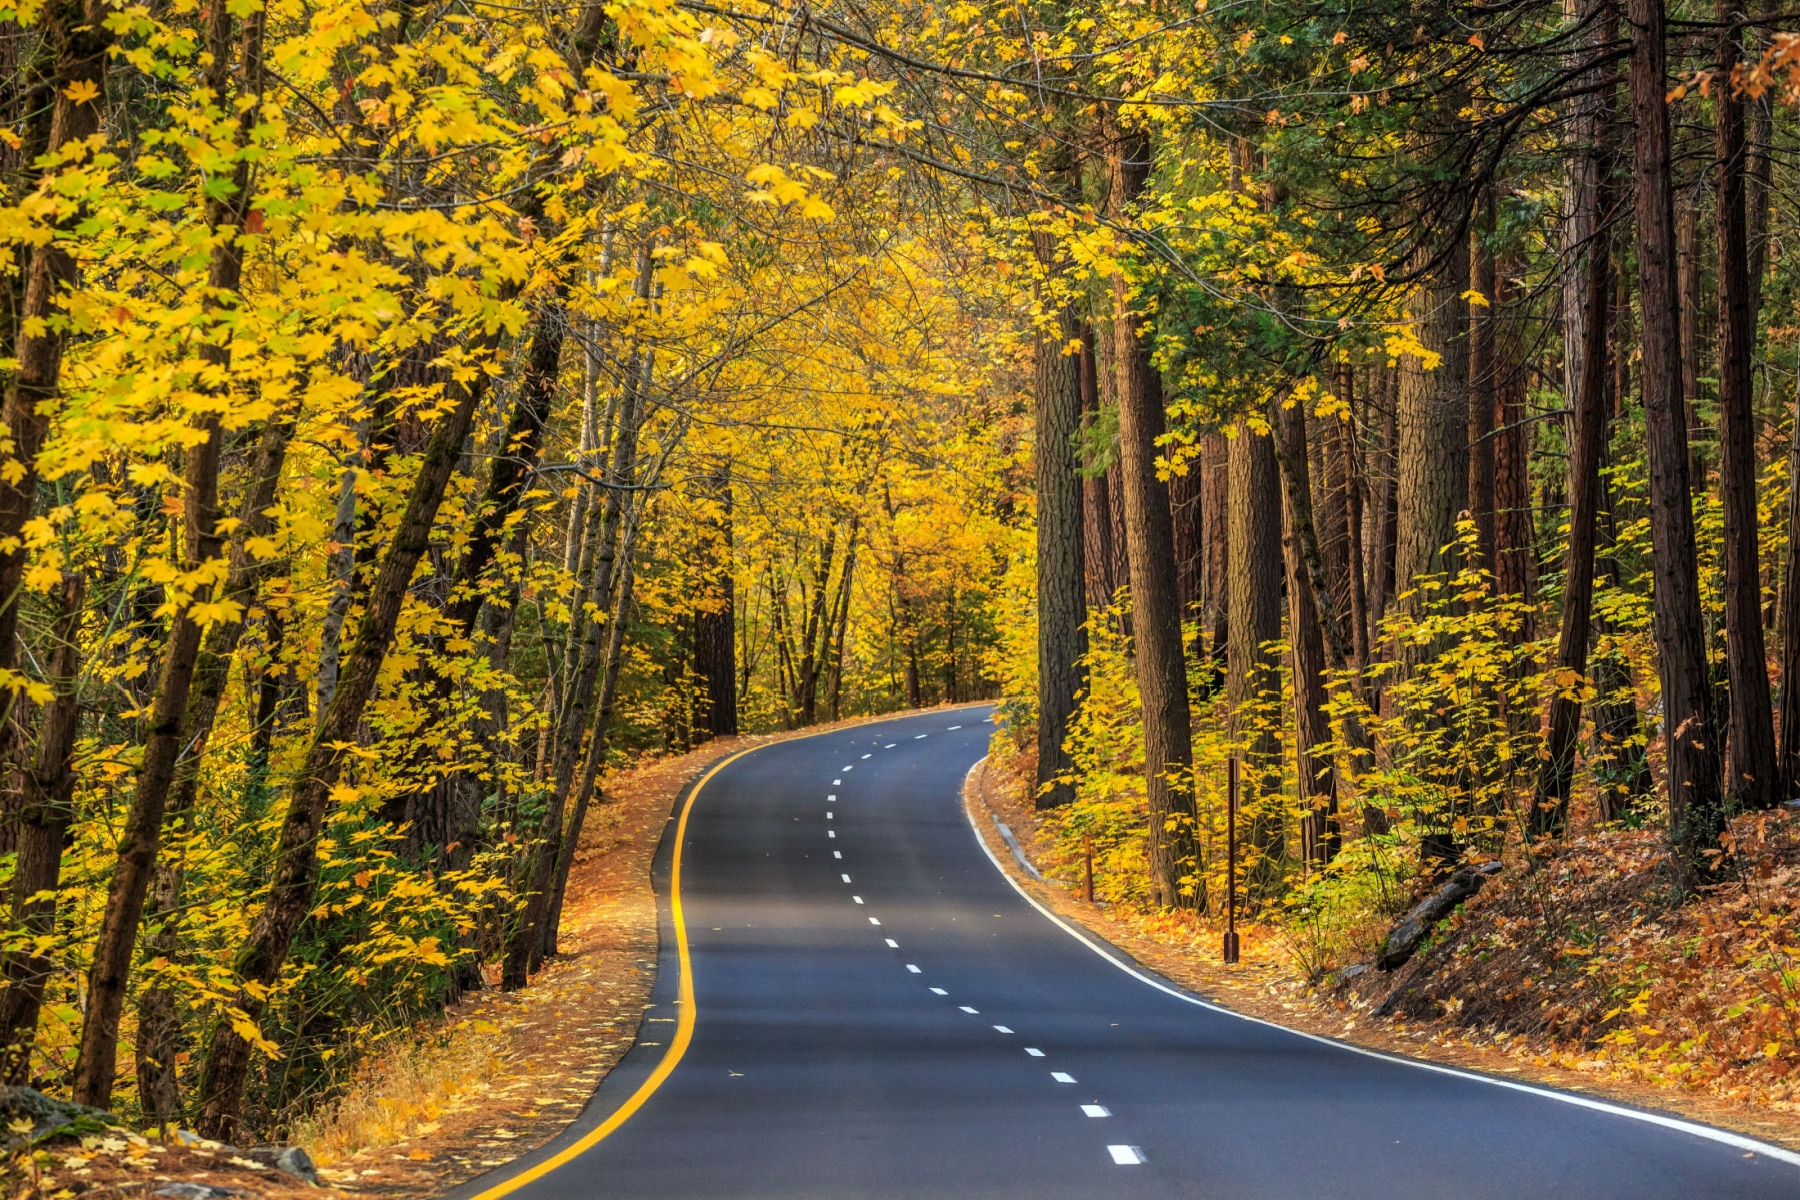 A road waves through an golden grove of trees in Yosemite.